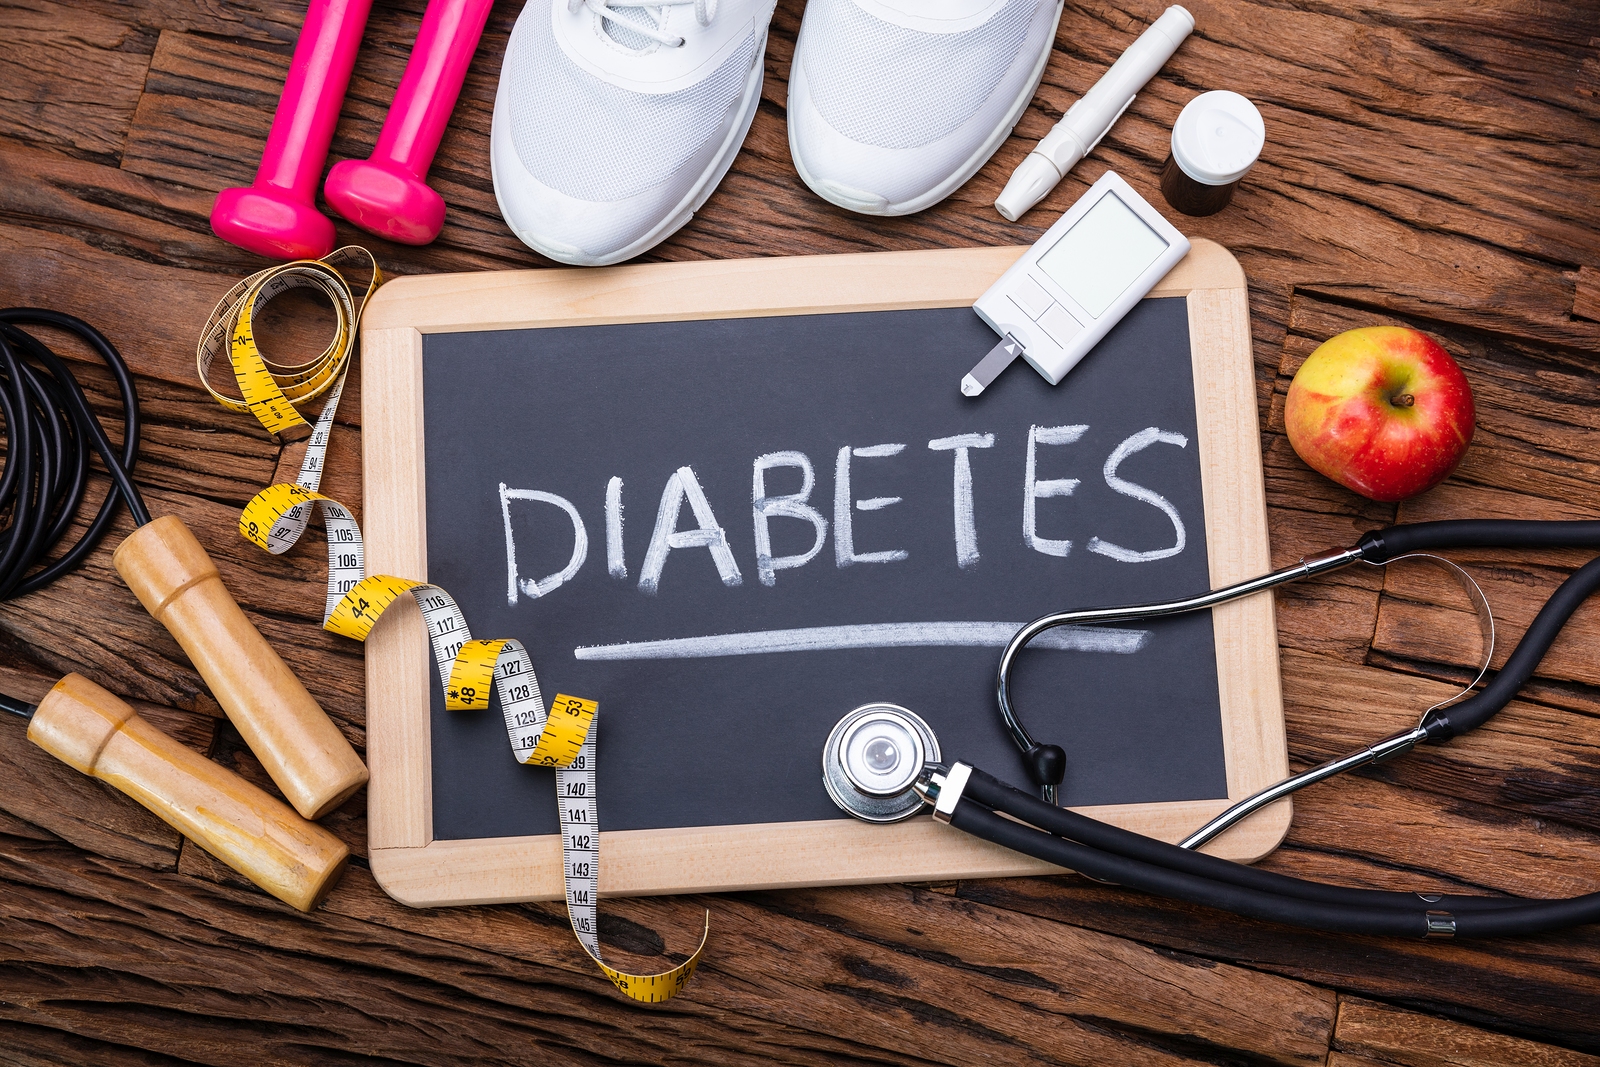 Can Diabetes Qualify as a Disability?